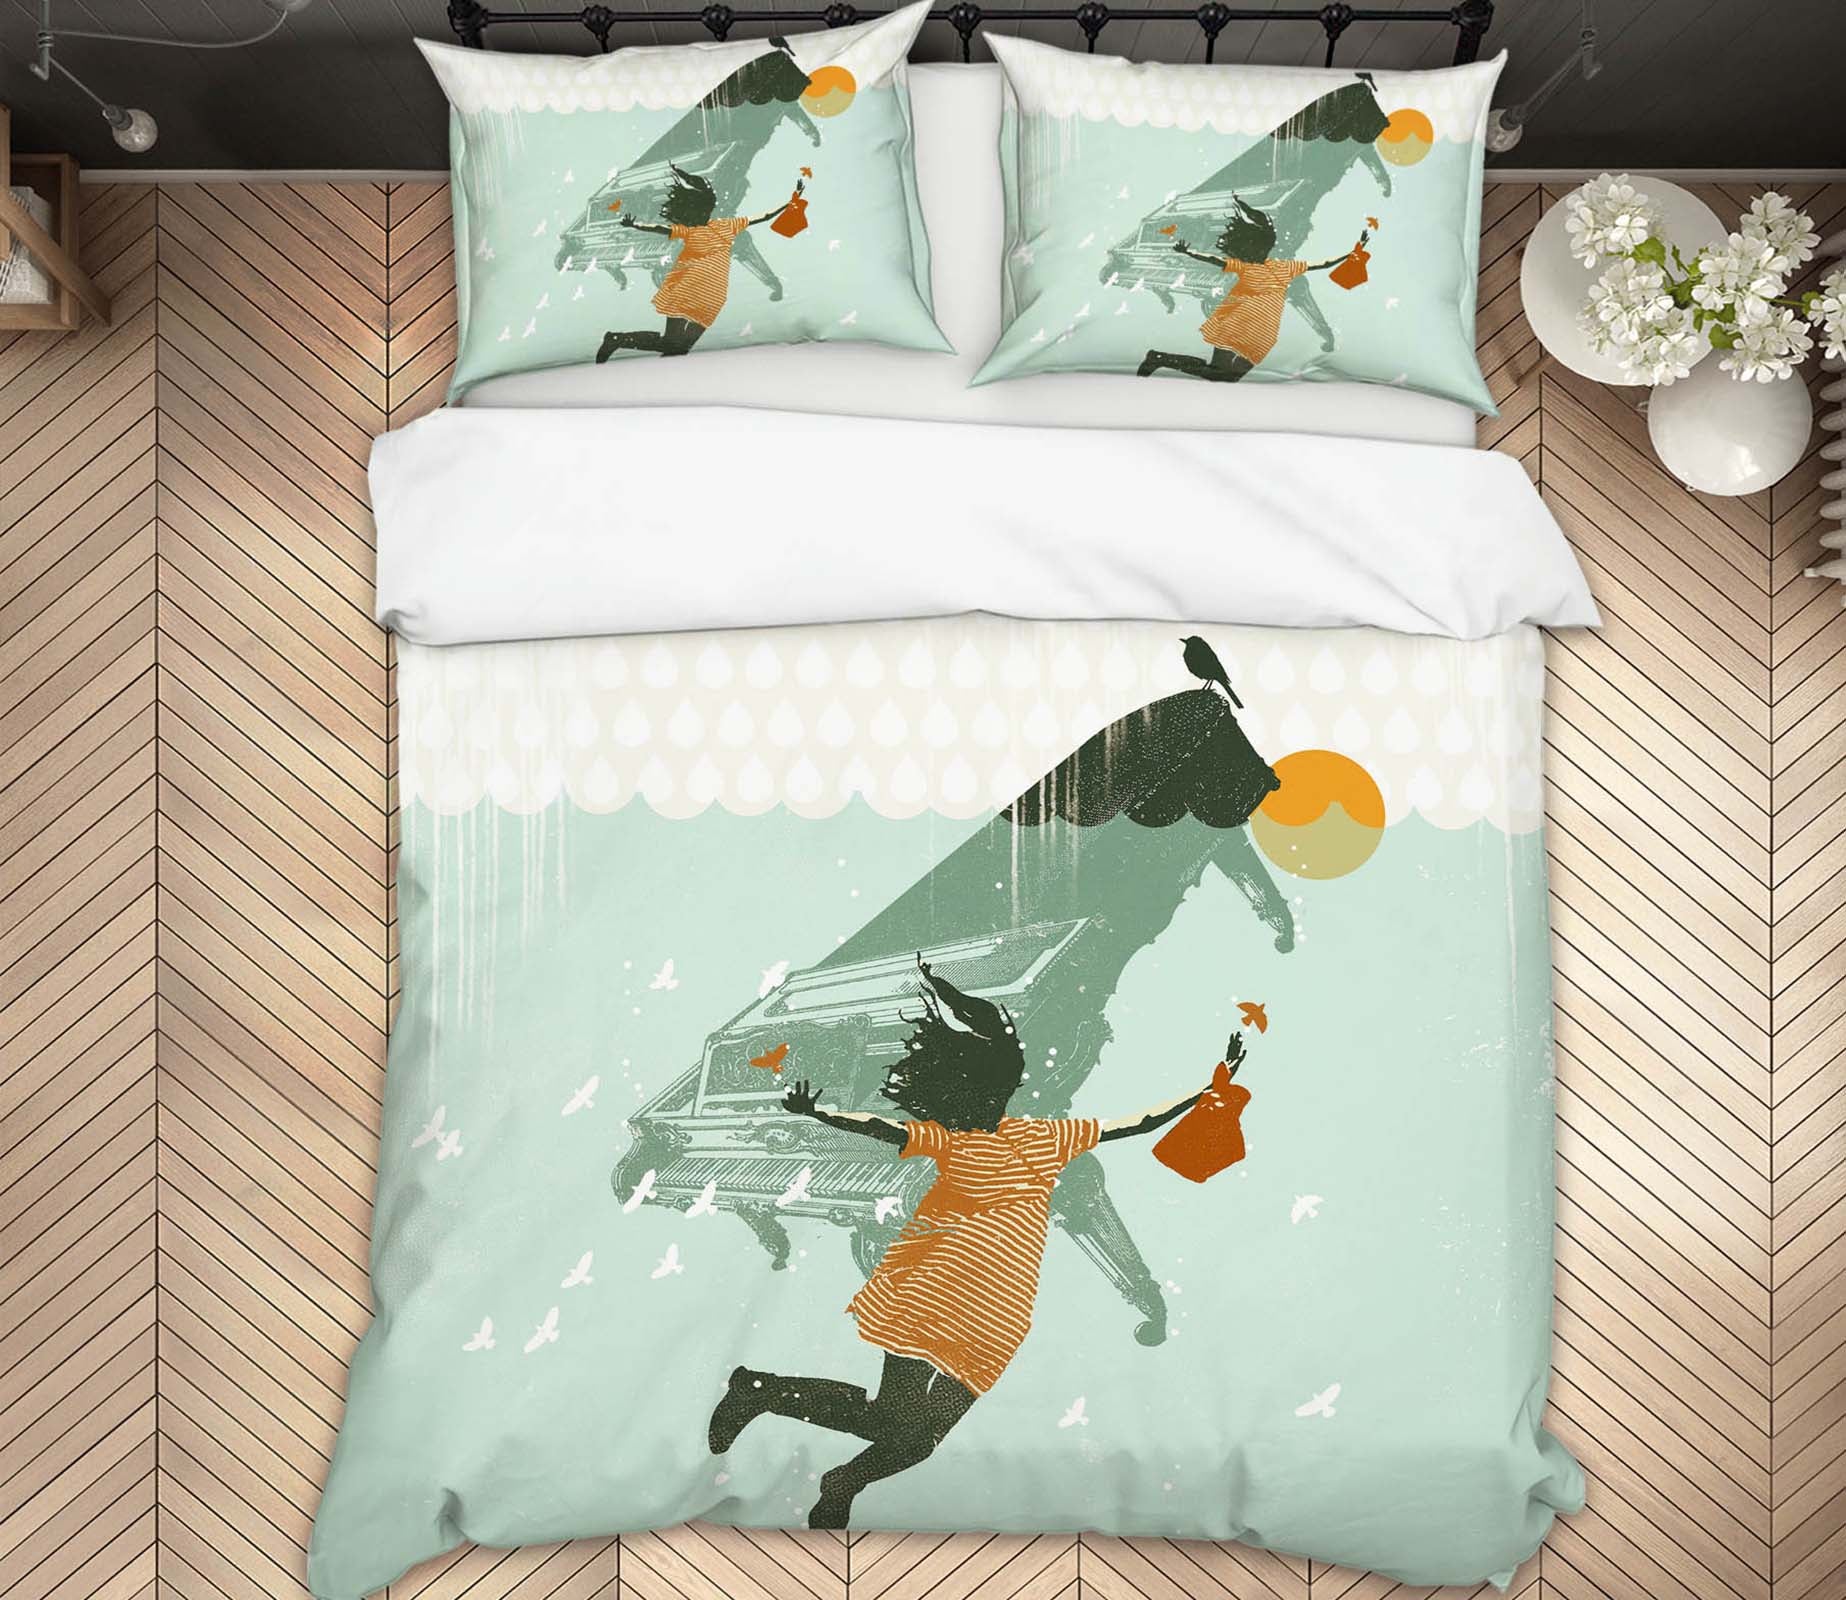 3D Swimming In Water 2119 Showdeer Bedding Bed Pillowcases Quilt